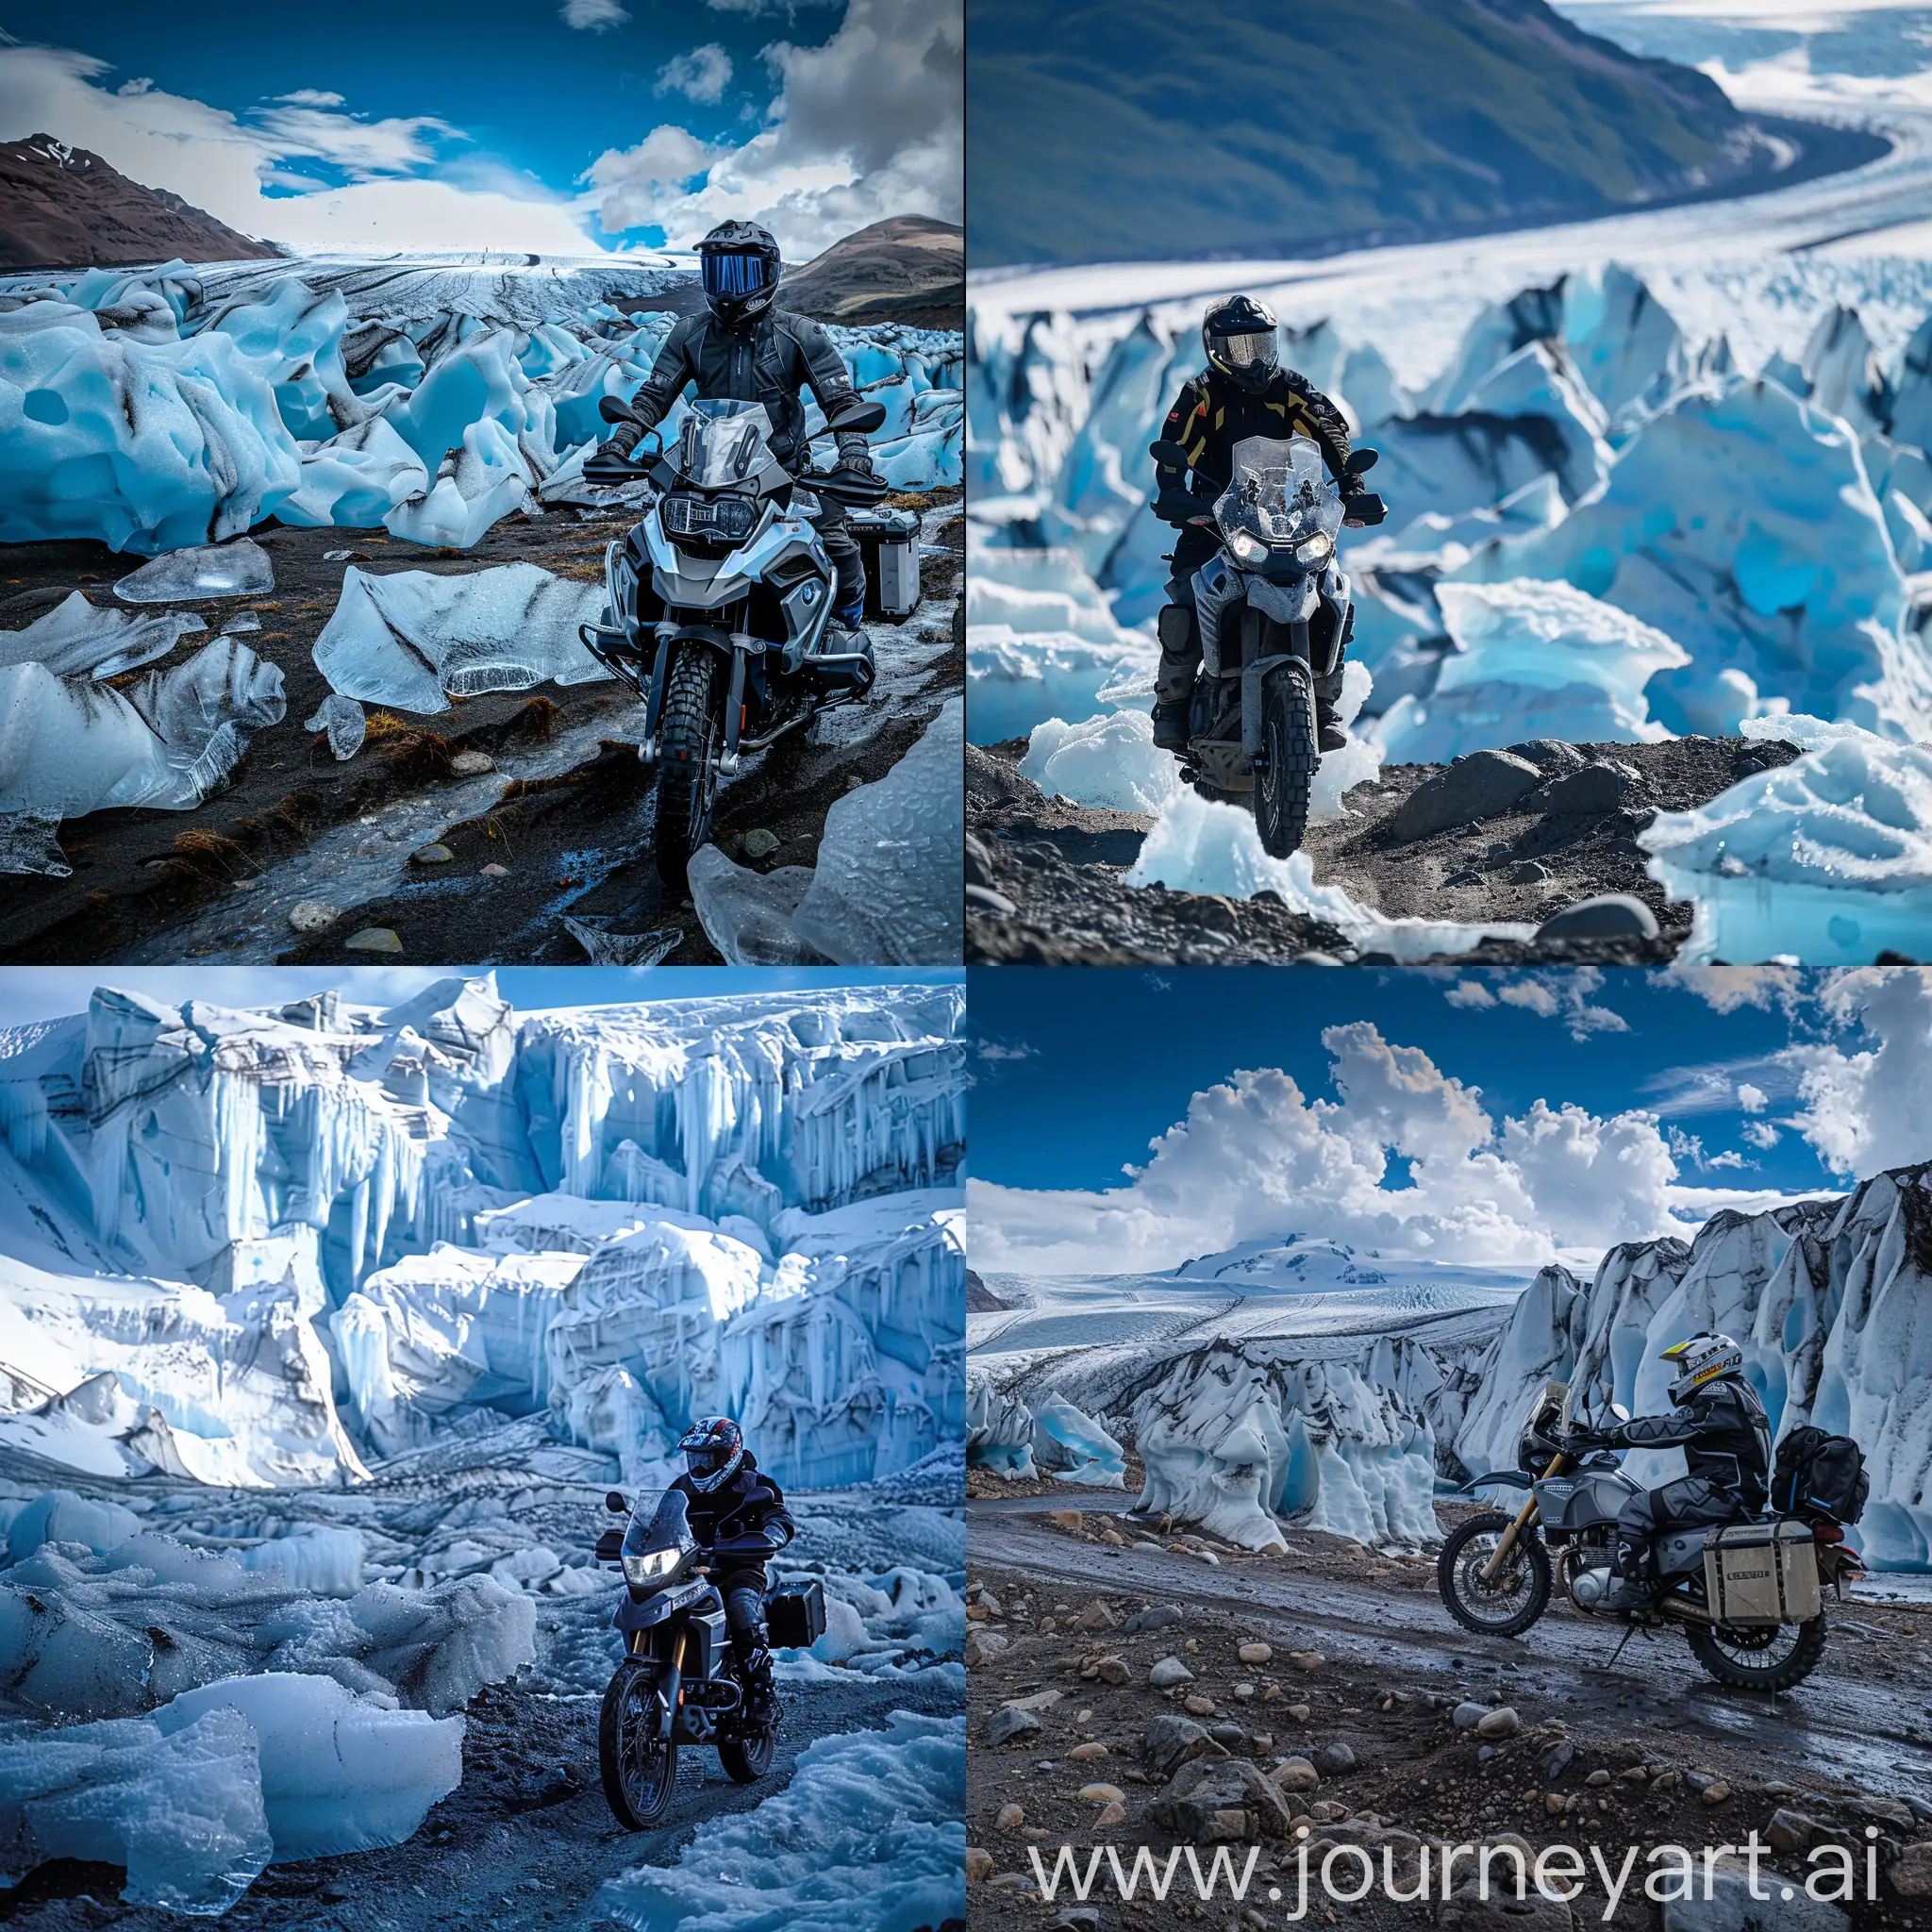 Motorcyclist-Riding-on-Rugged-Ice-Penitentes-Terrain